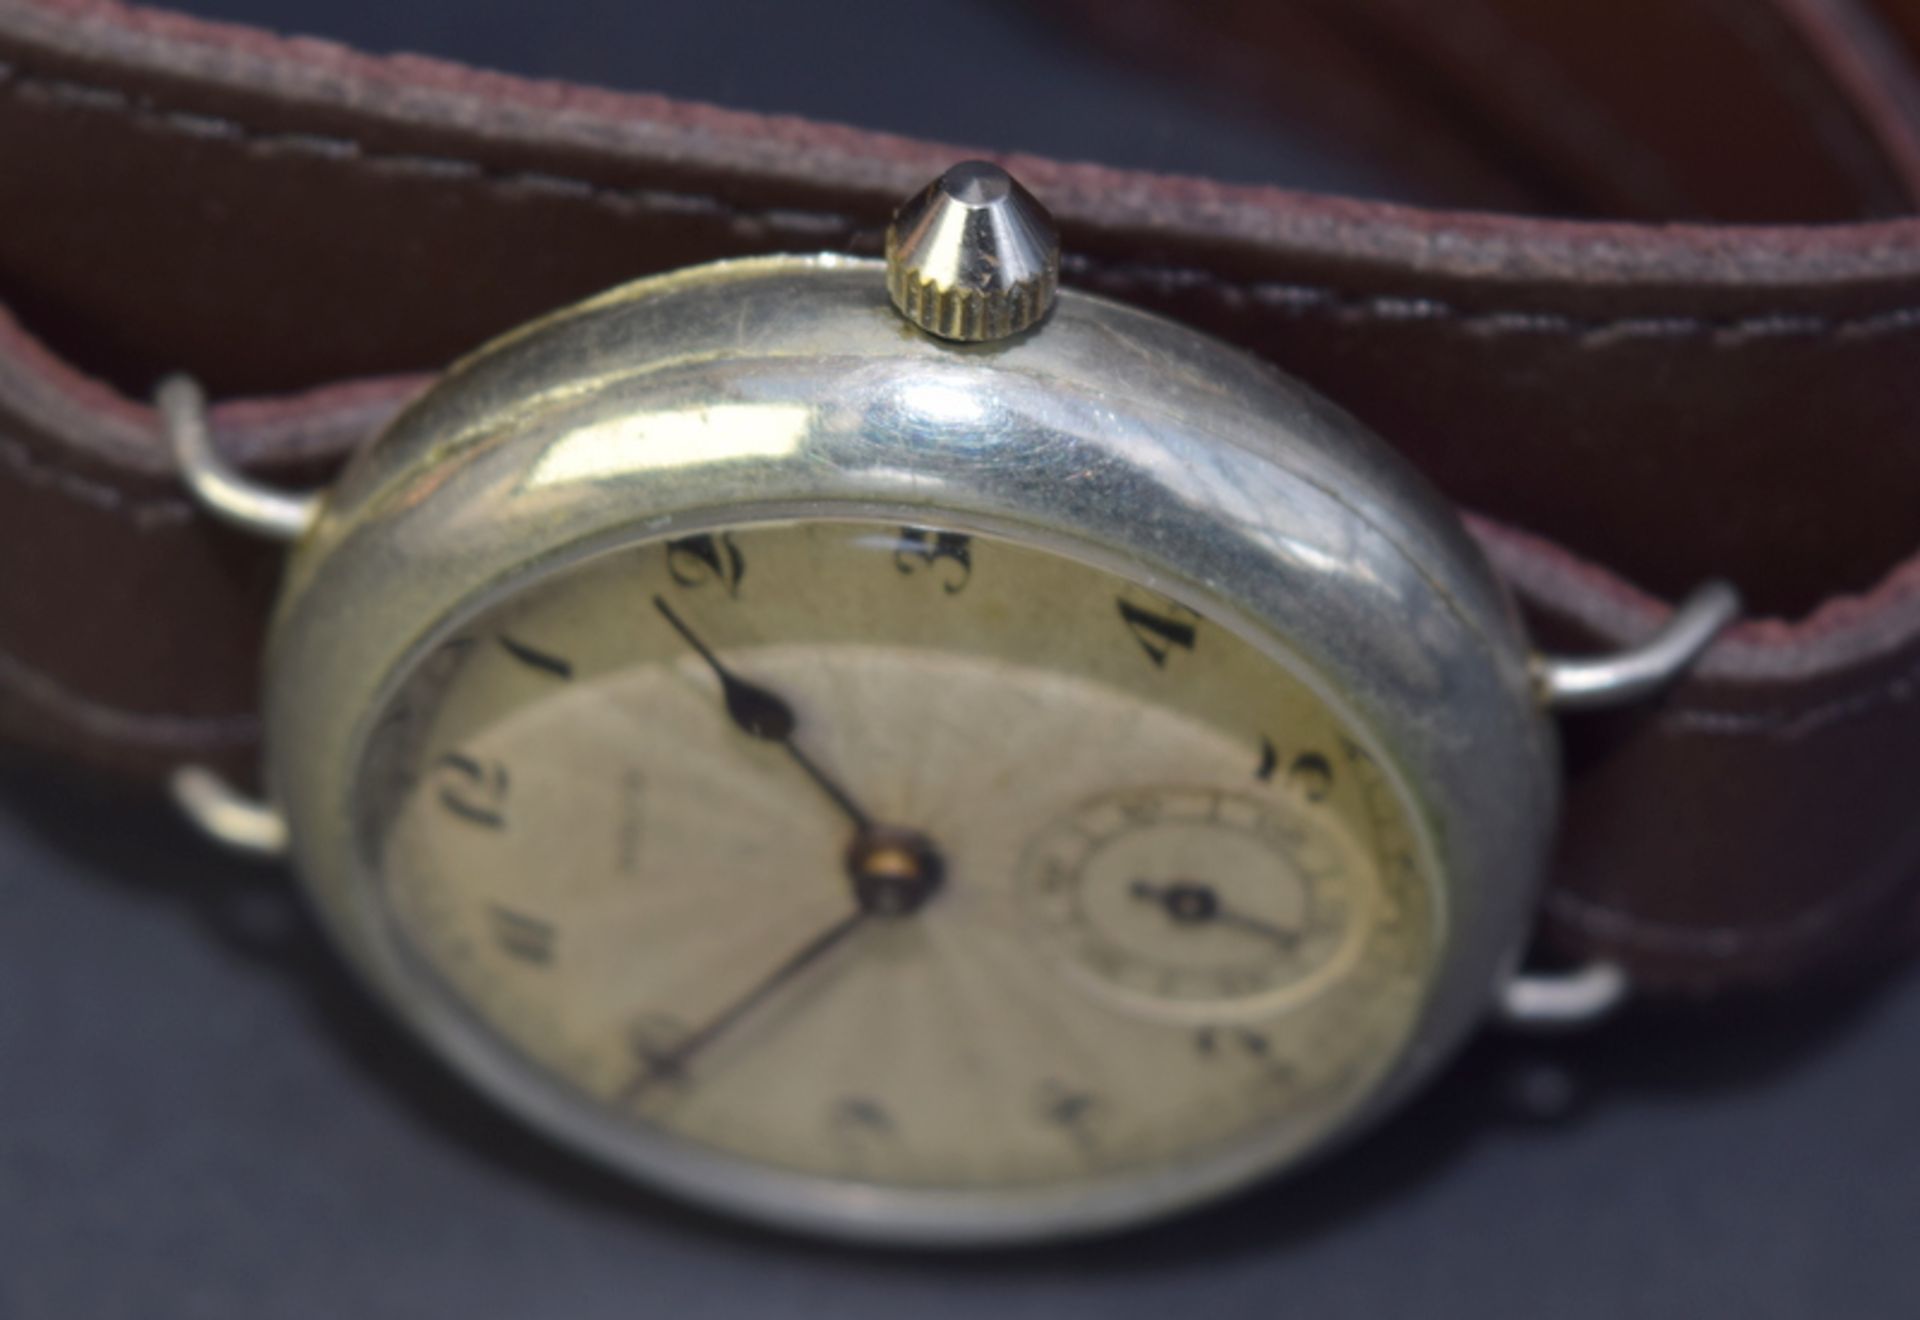 Rolco (Early Rolex) Trench Watch - Image 3 of 6